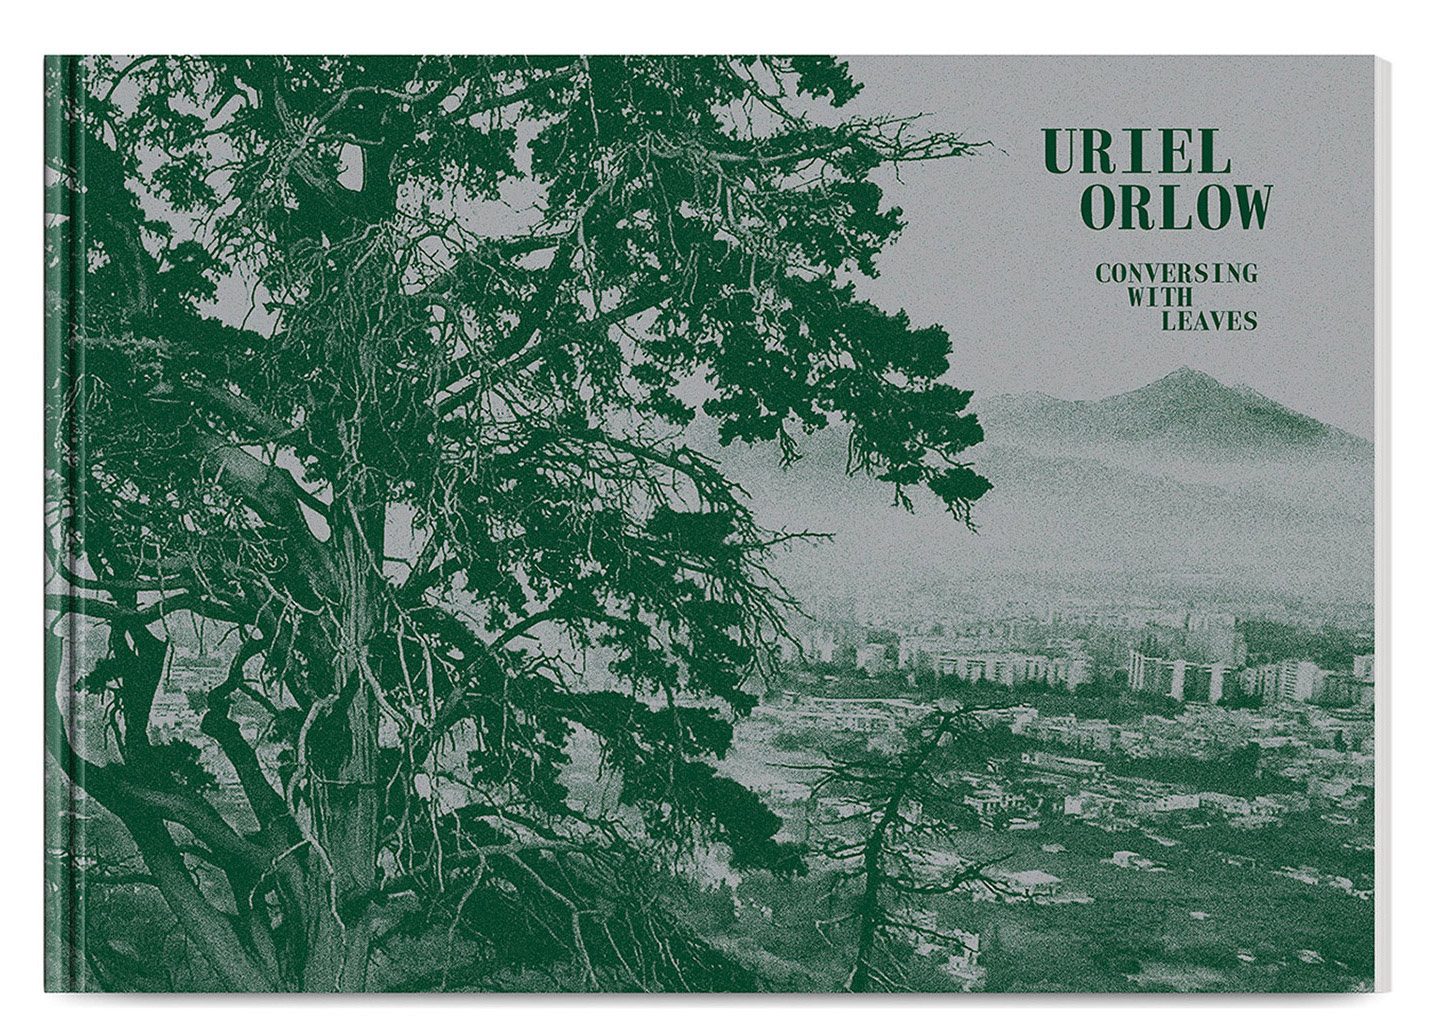 Exhibition catalogue and monograph for Uriel Orlow's show at Kunsthalle Mainz, Germany, designed by In the shade of a tree studio, founded by Sophie Demay and Maël Fournier Comte